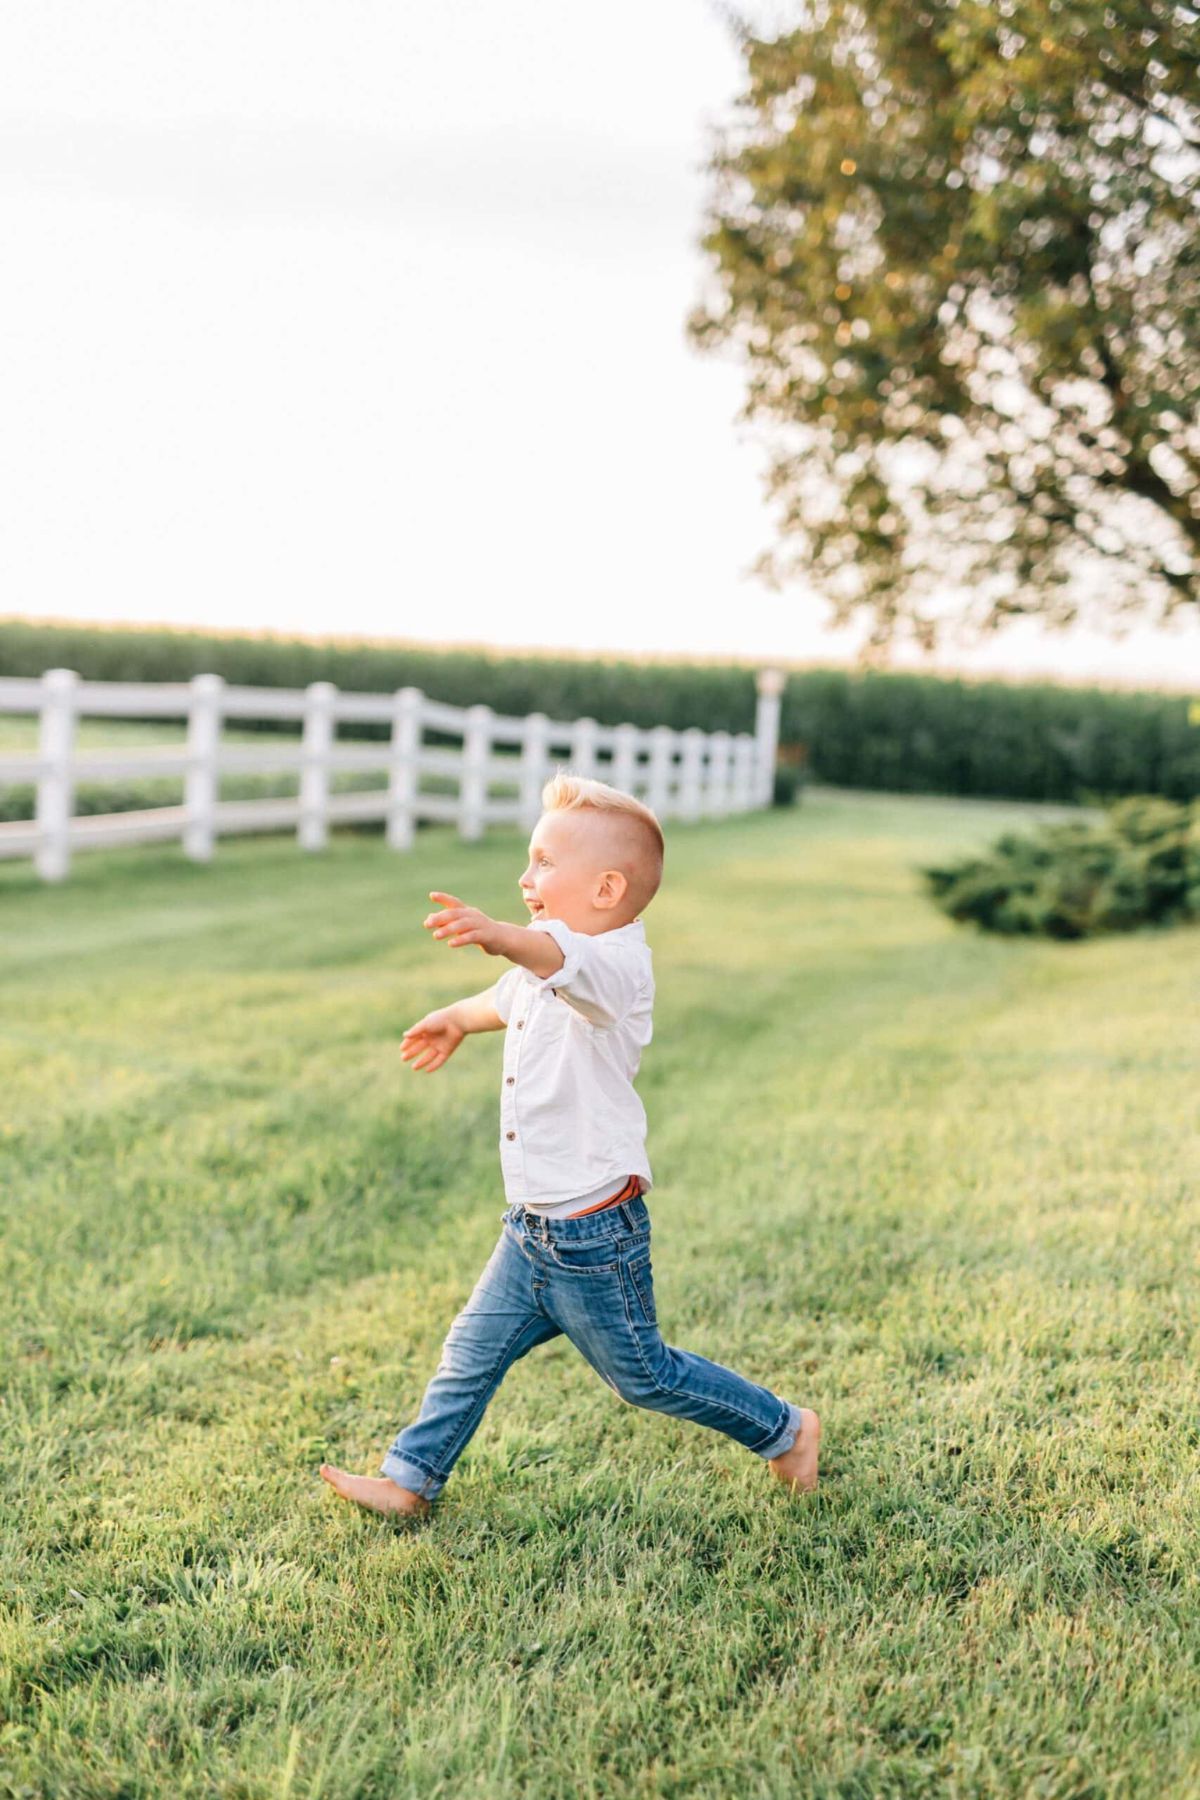 Toddler boy wearing white button up and jeans runs on a lawn while laughing.